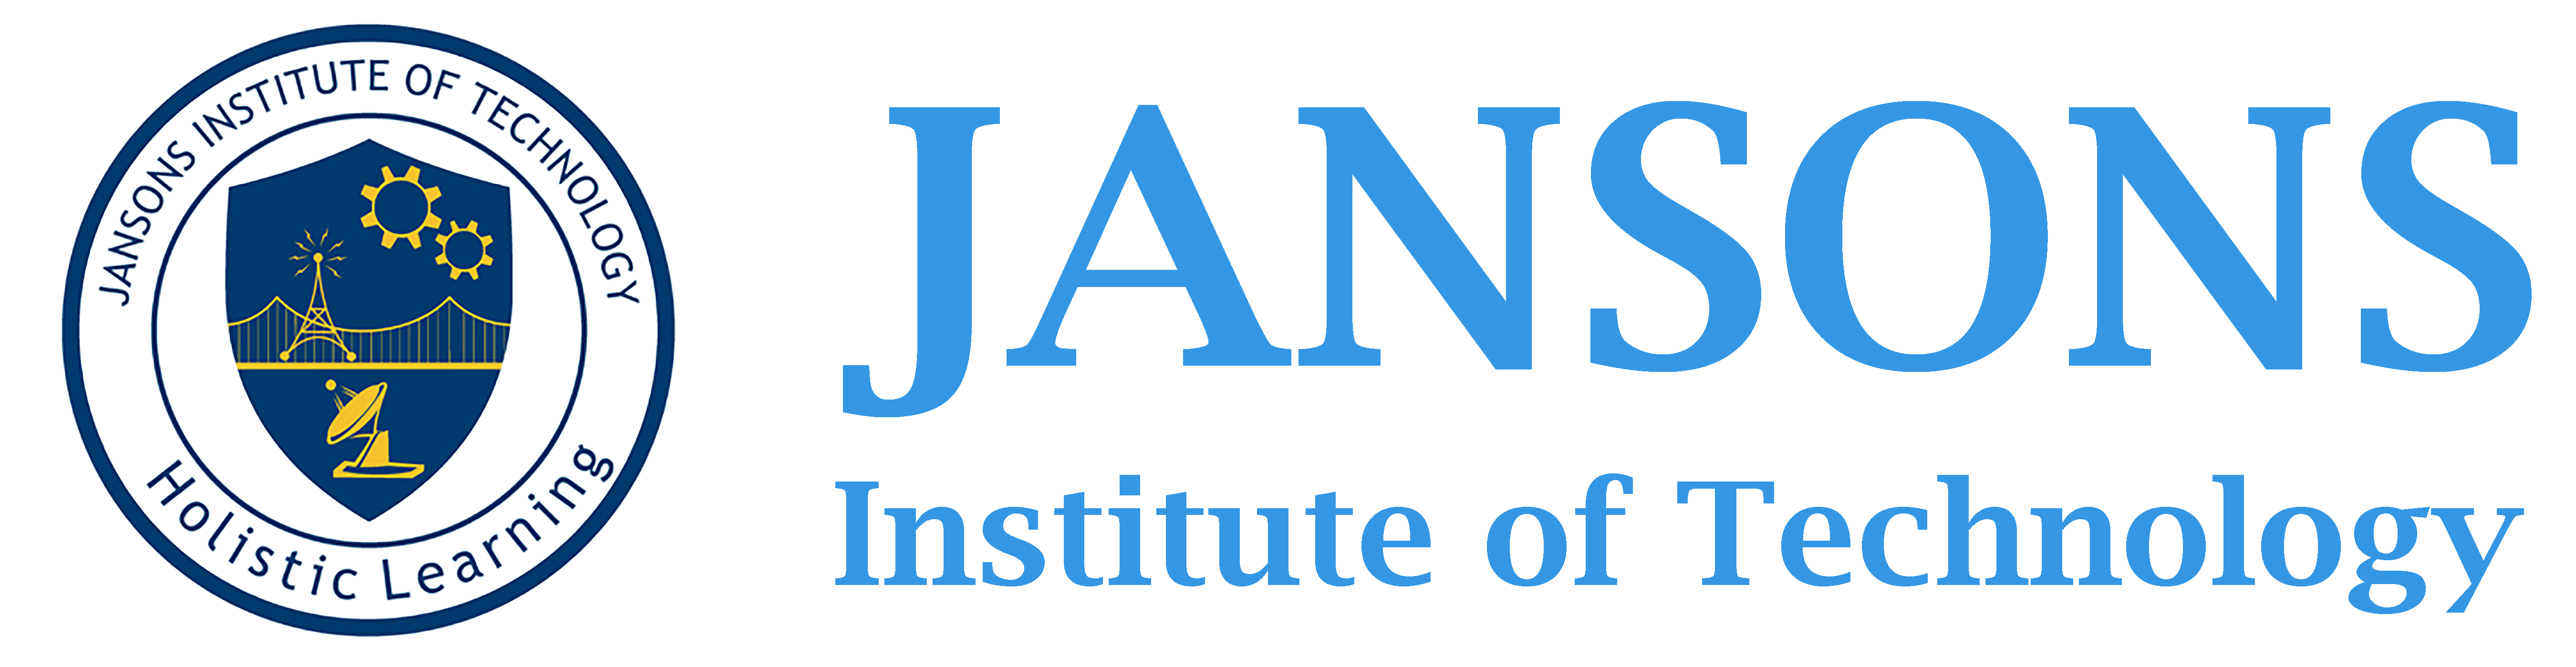 Jansons Institute of Technology